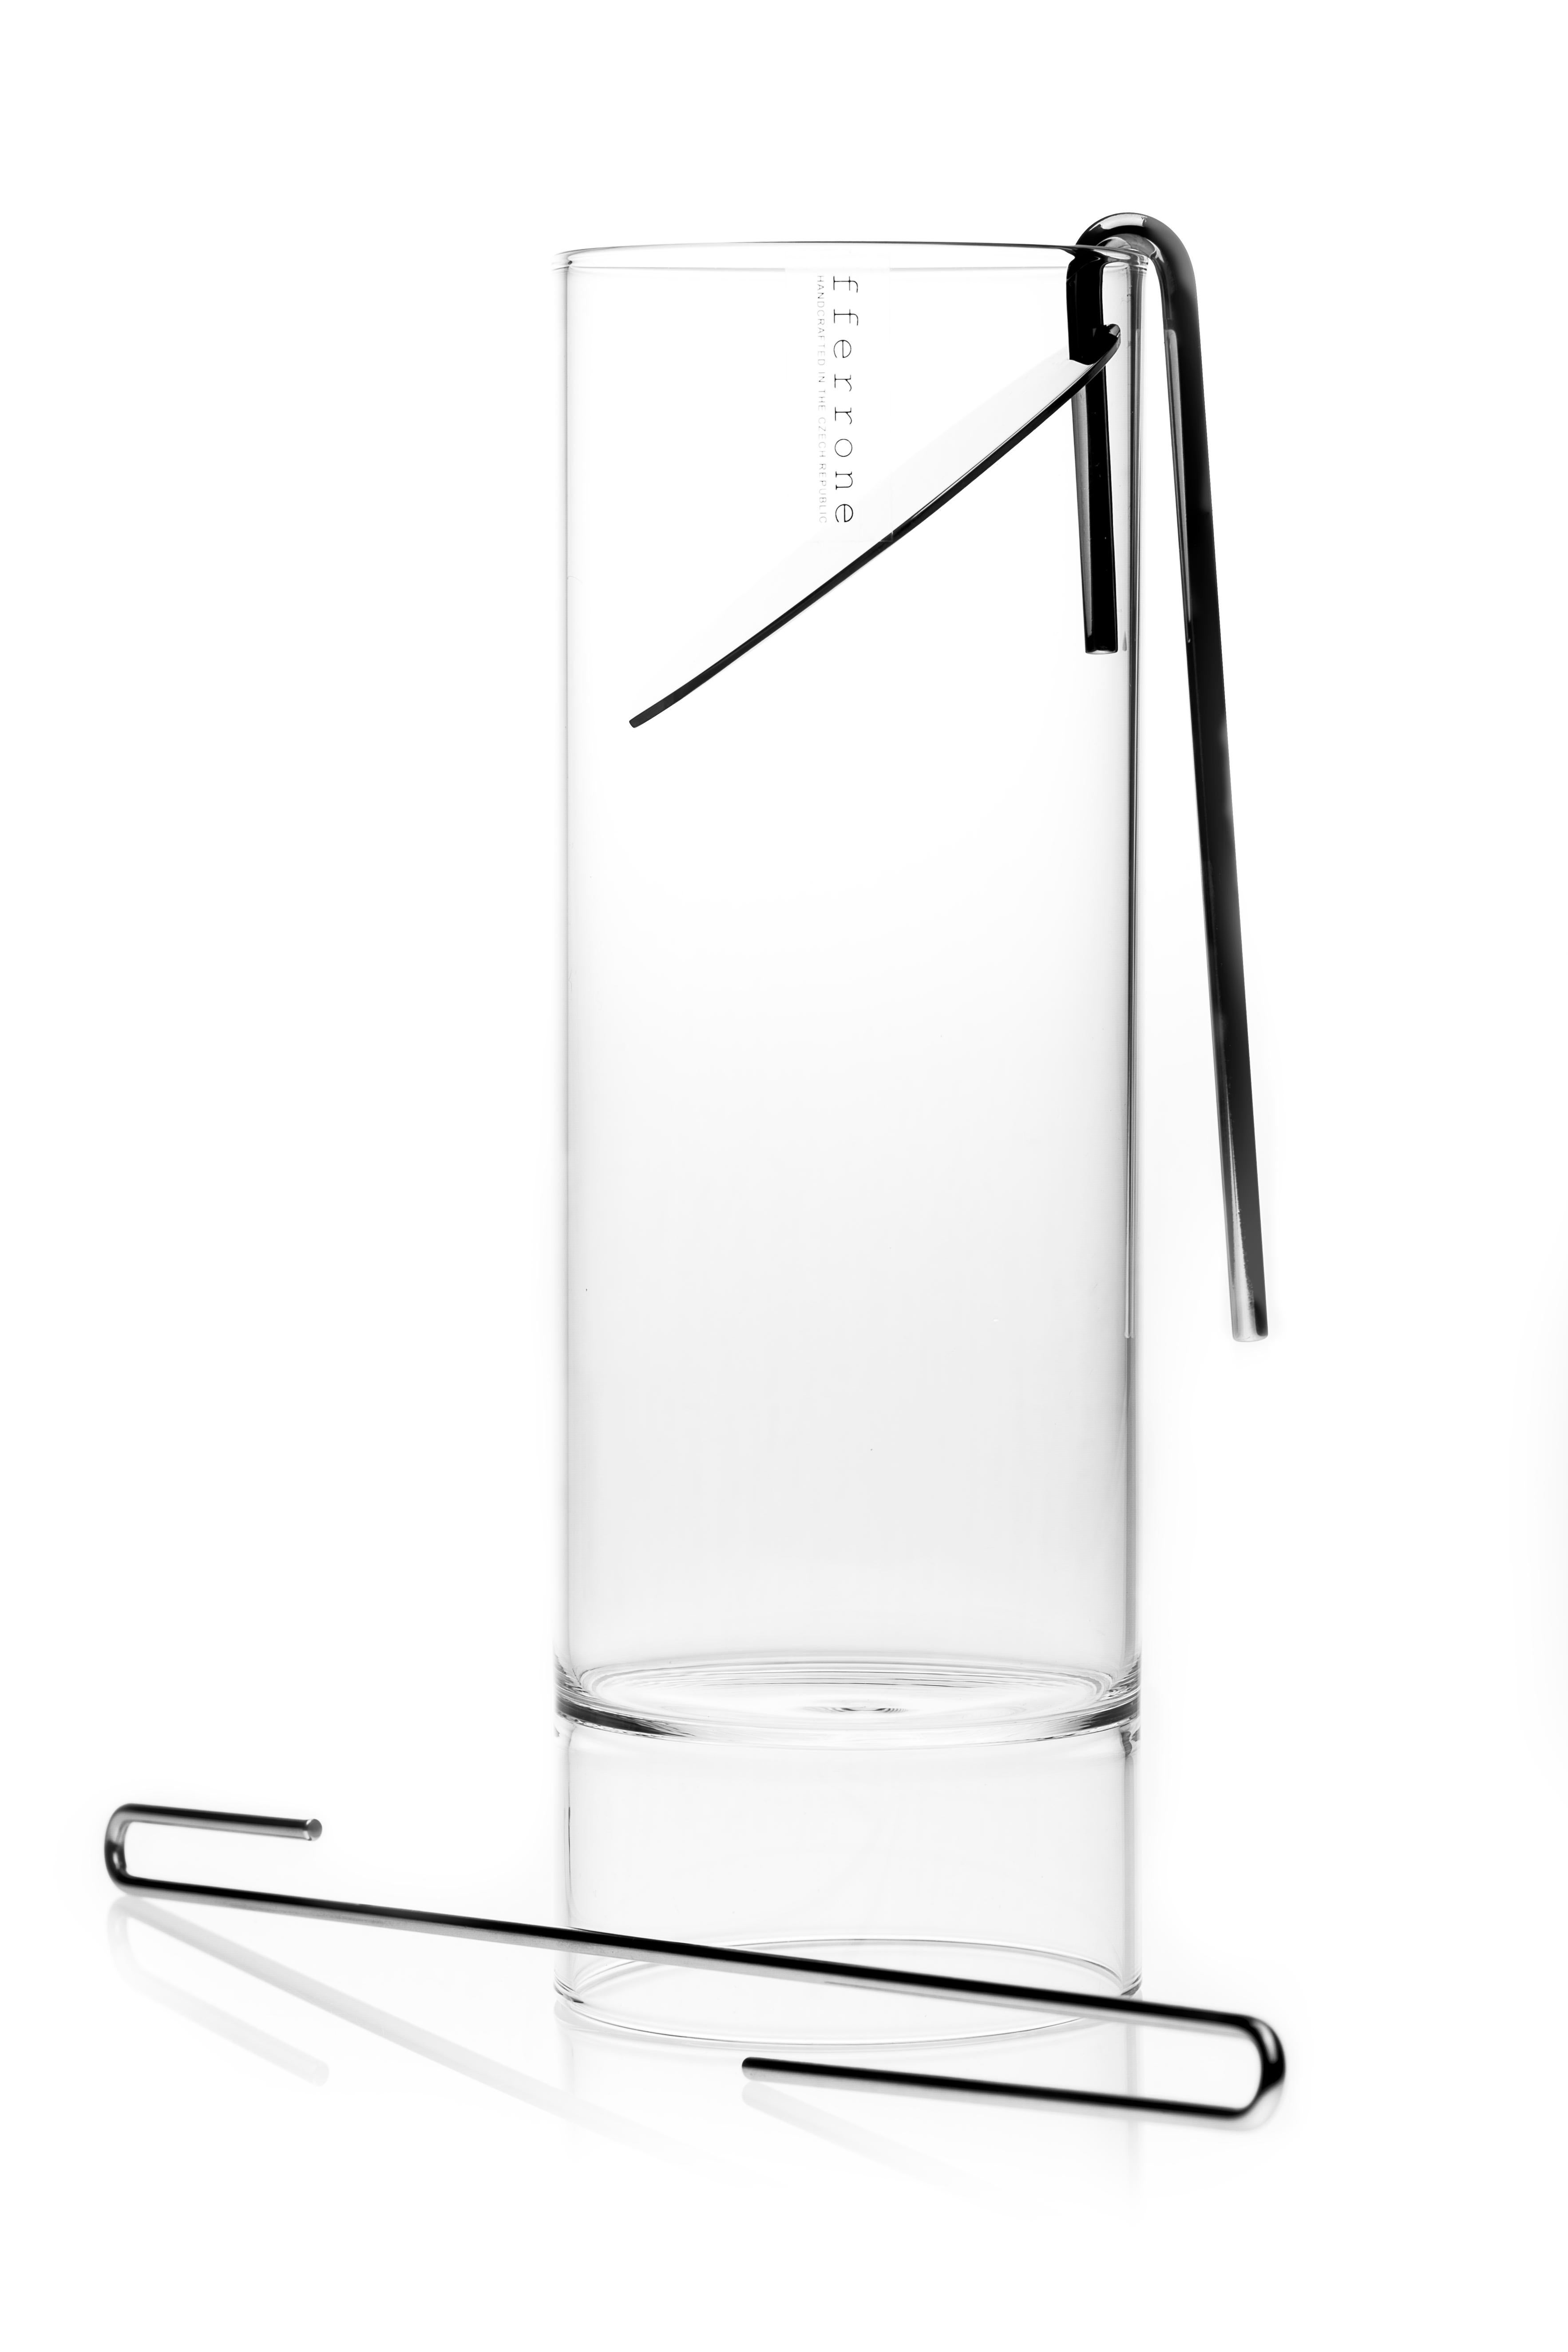 The contemporary Czech glass minimal Revolution collection set includes a cocktail mixer carafe, strainer, stir stick, and eight double-ended Rocks Martini glasses.

Strikingly simple in form, the minimal Revolution collection is handcrafted in